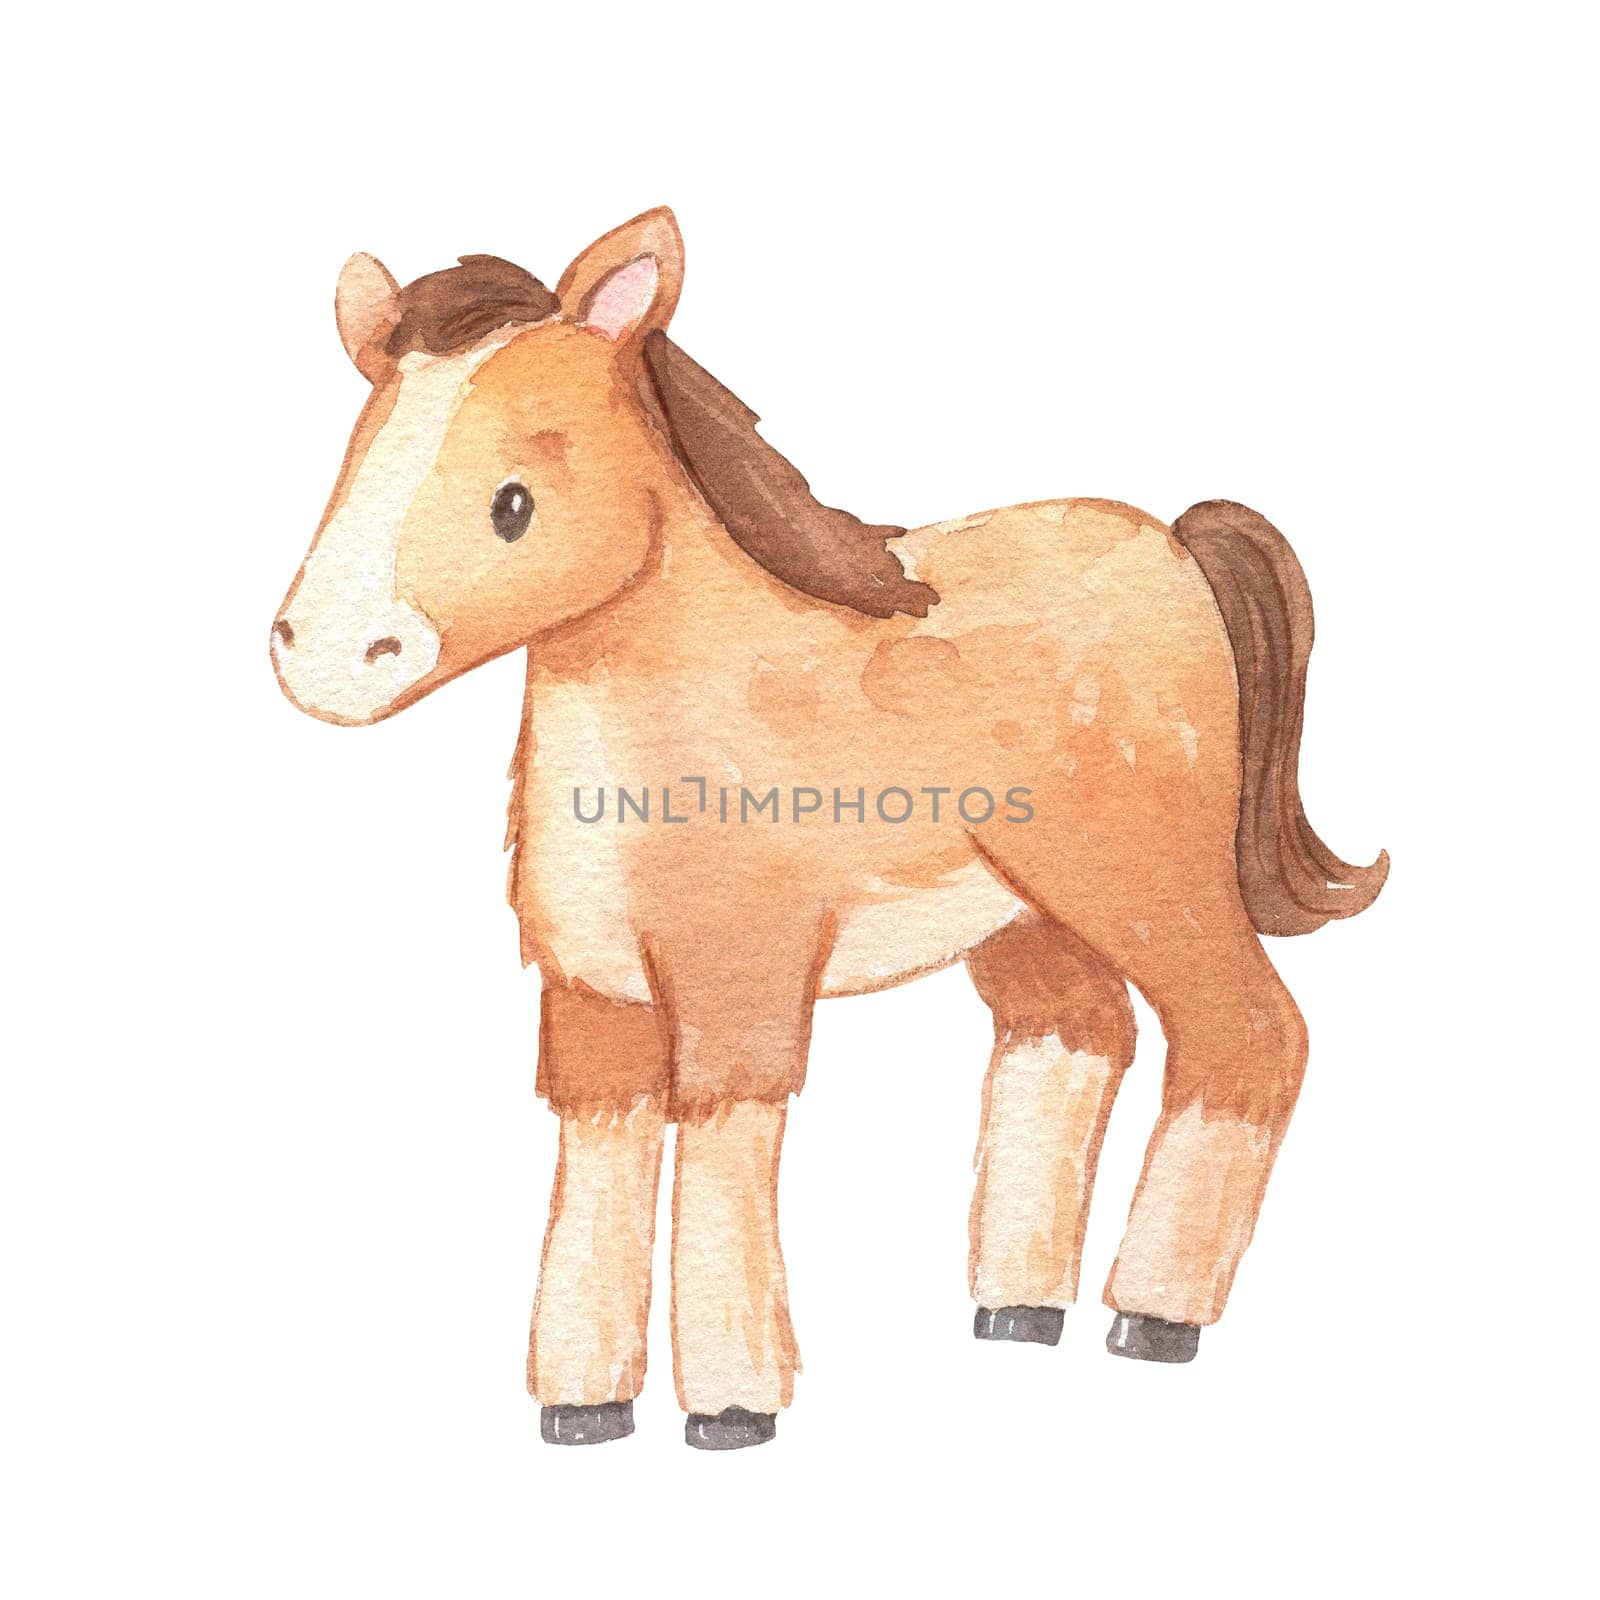 Cute horse character isolated on white background. Childish watercolor illustration with farm animal for kids